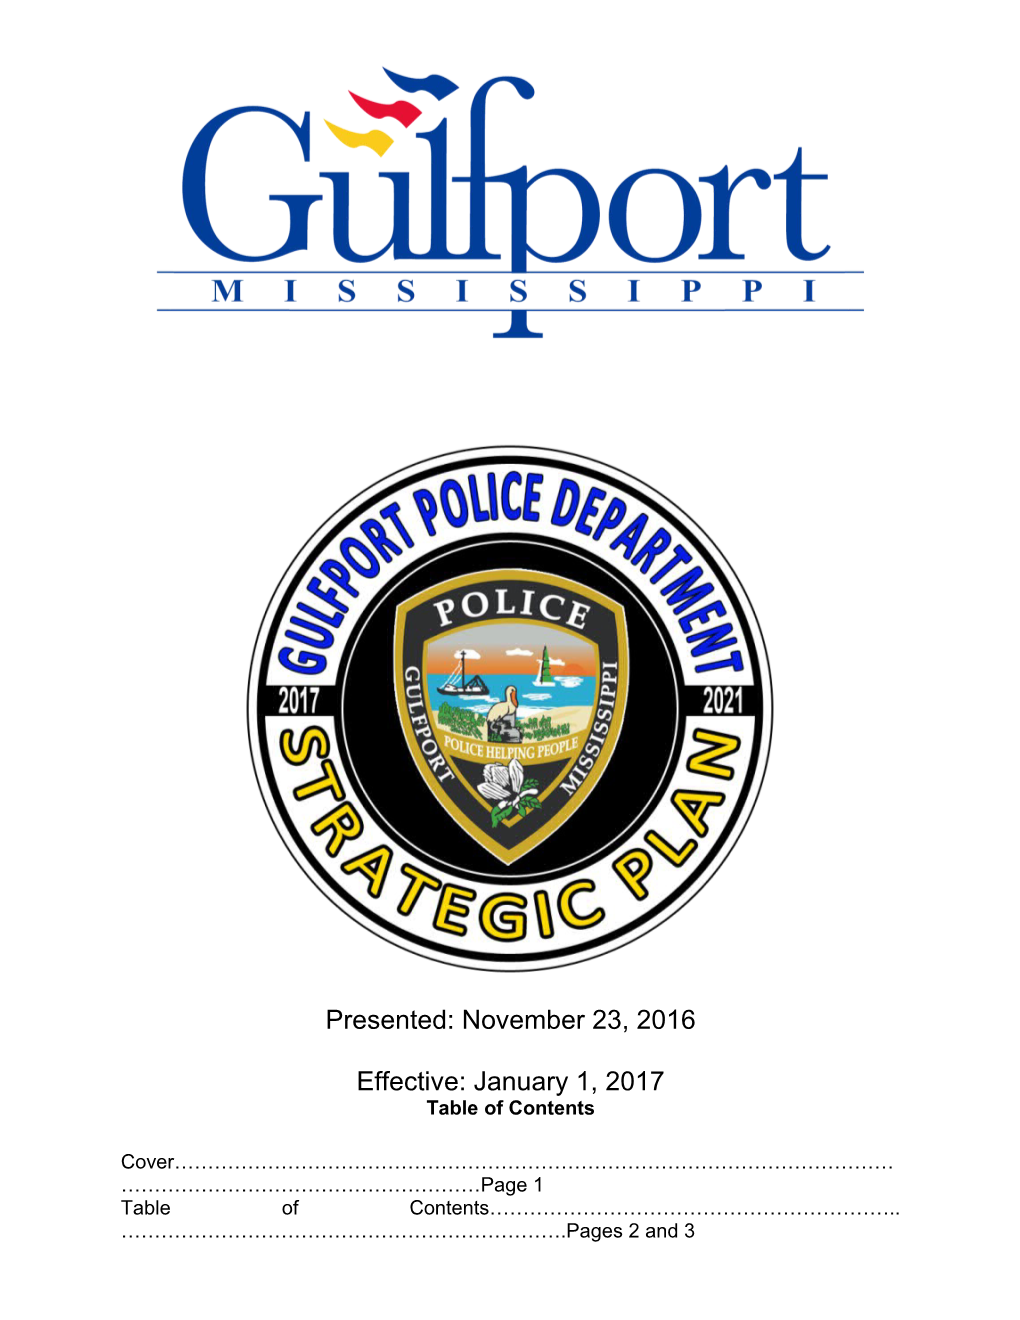 City Ofolice Department Contemporary Issues Gulfport P